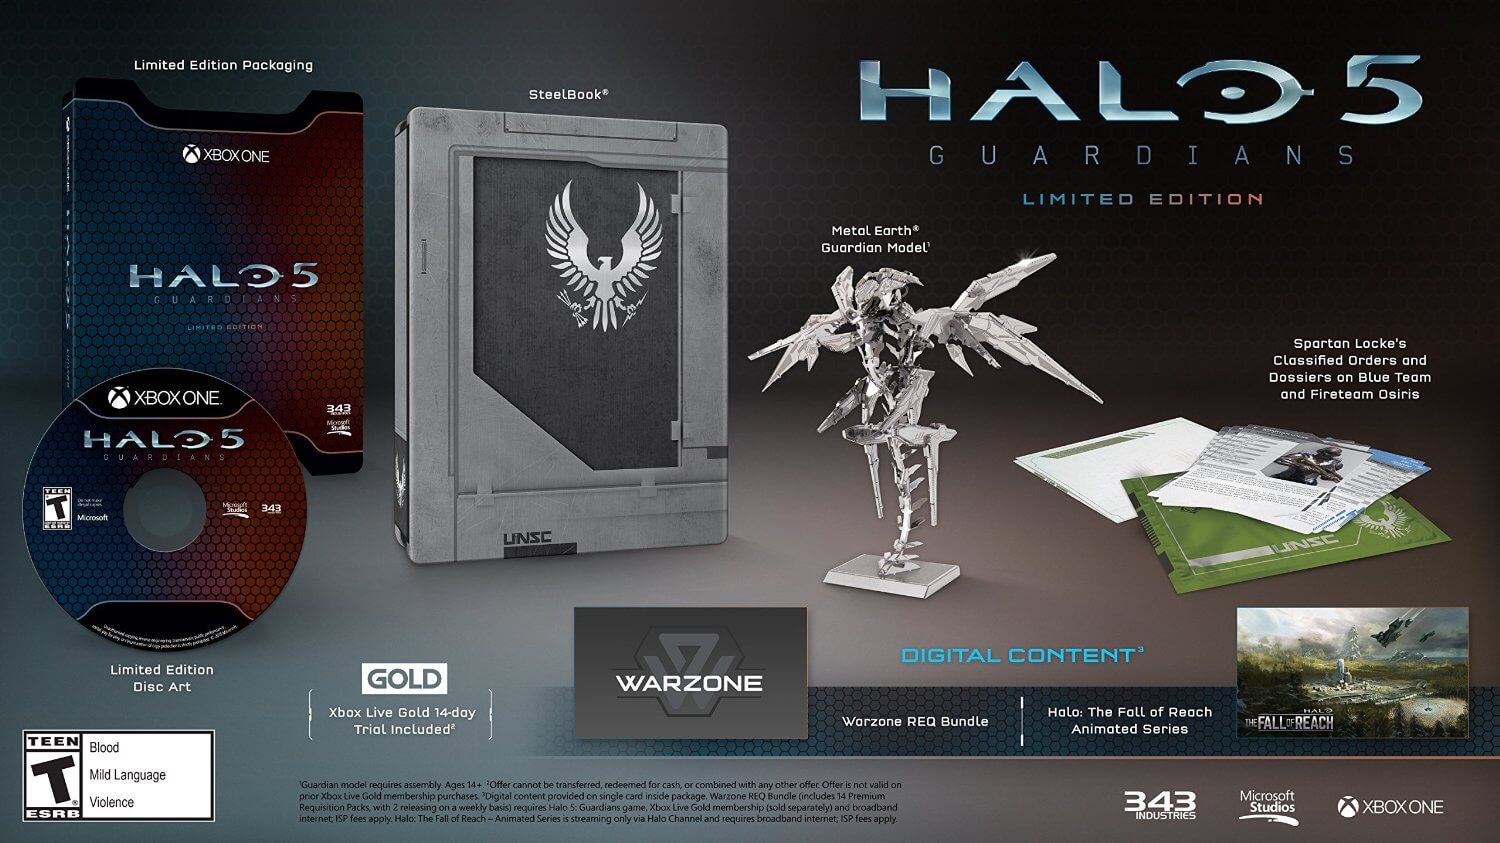 Buy Halo 5: Guardians Limited Edition for $28 